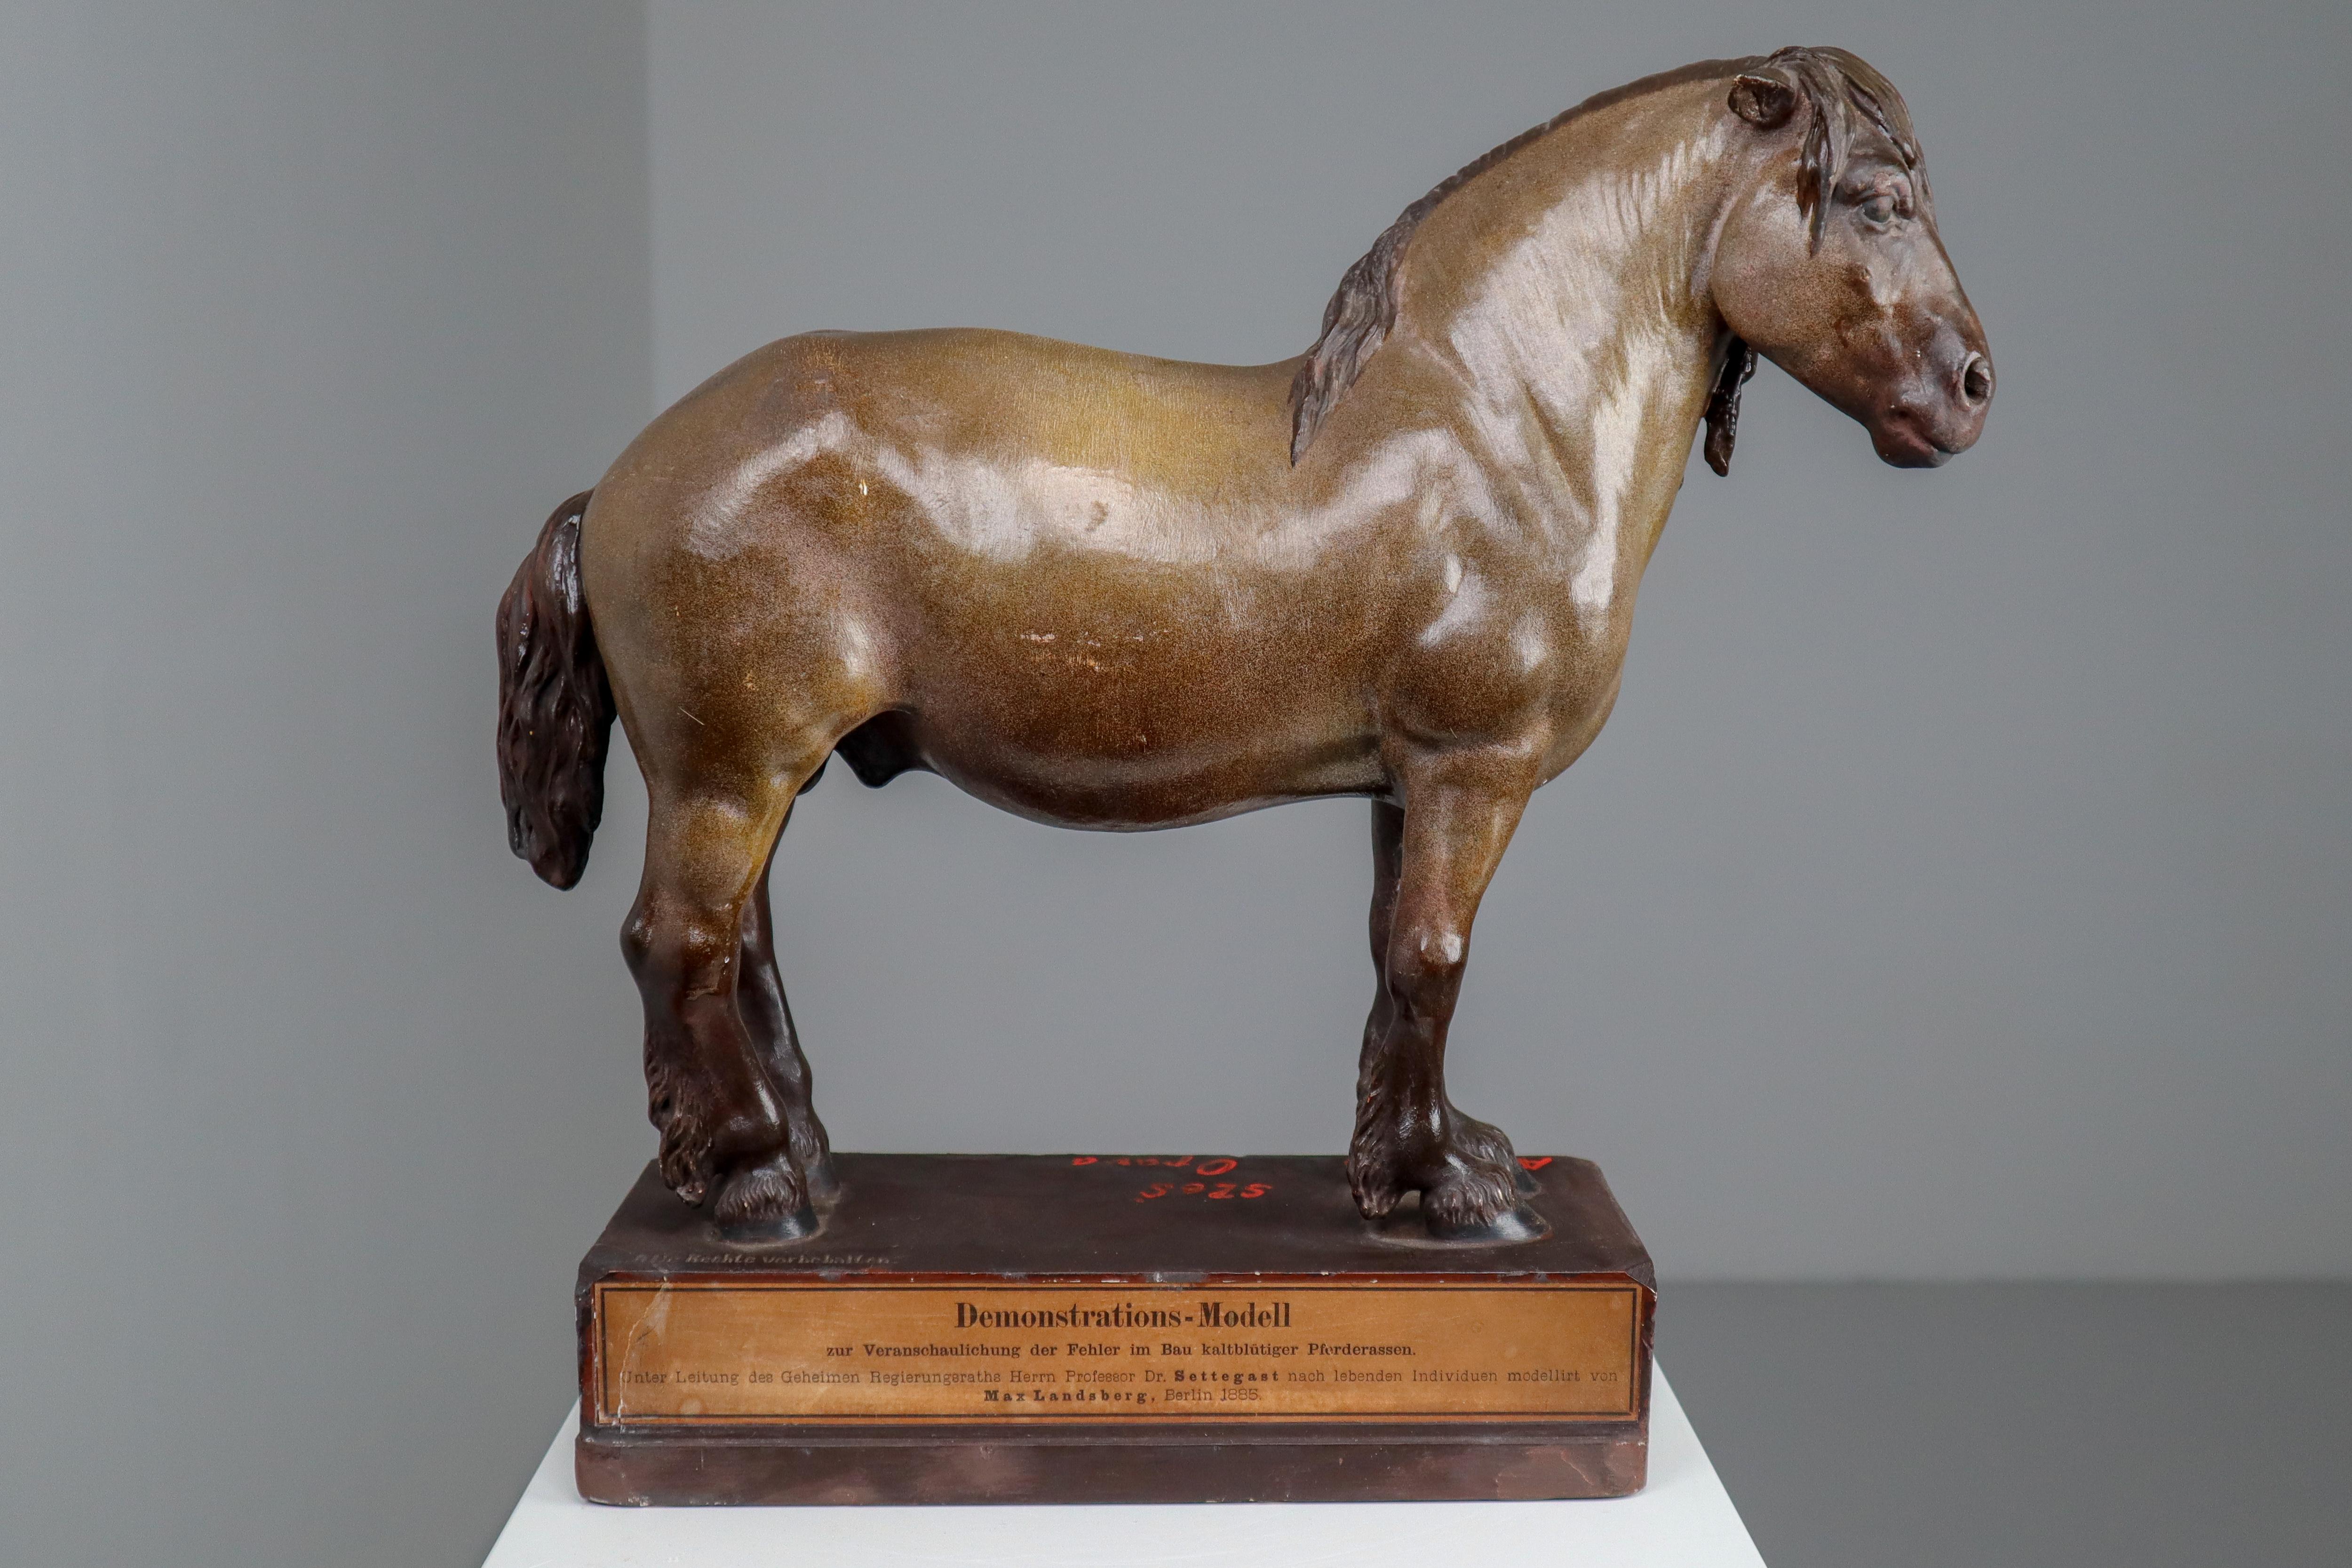 An cold blood horse model in painted plaster by Max Landsberg, Berlin after 1885, painted plaster, inscribed on base “Demonstrations Model 